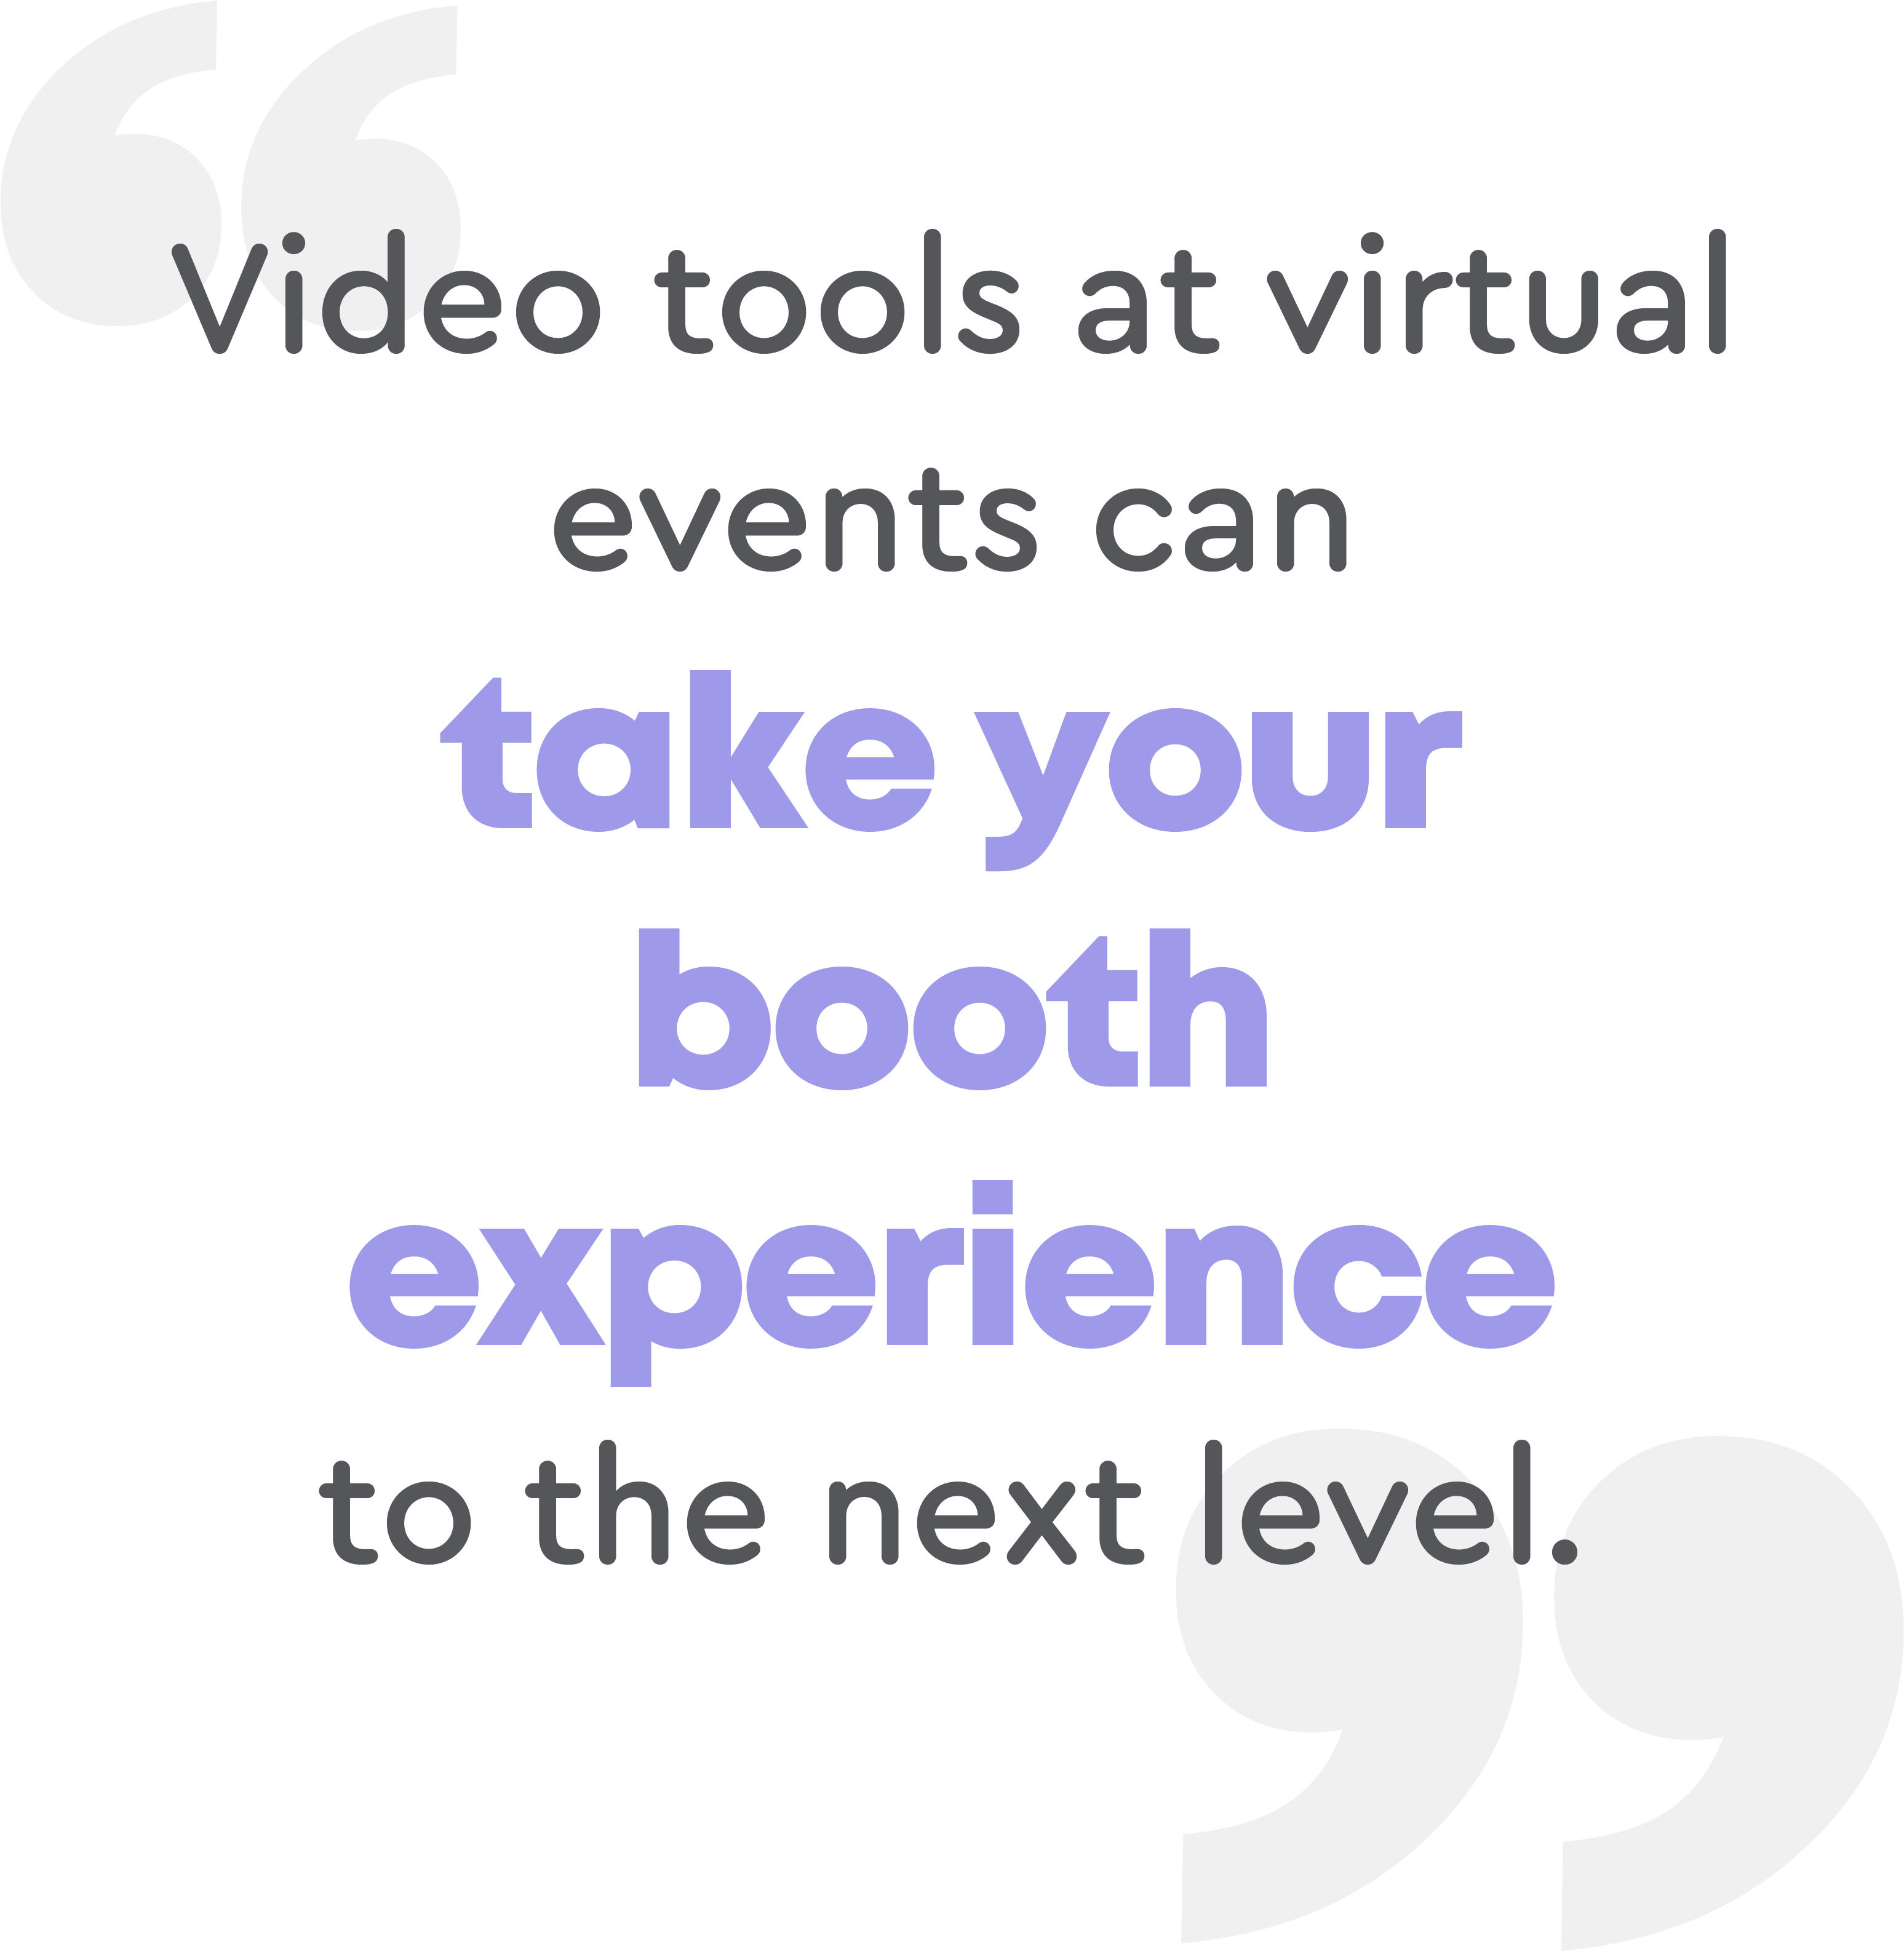 Video tools at virtual events can take your booth experience to the next level.